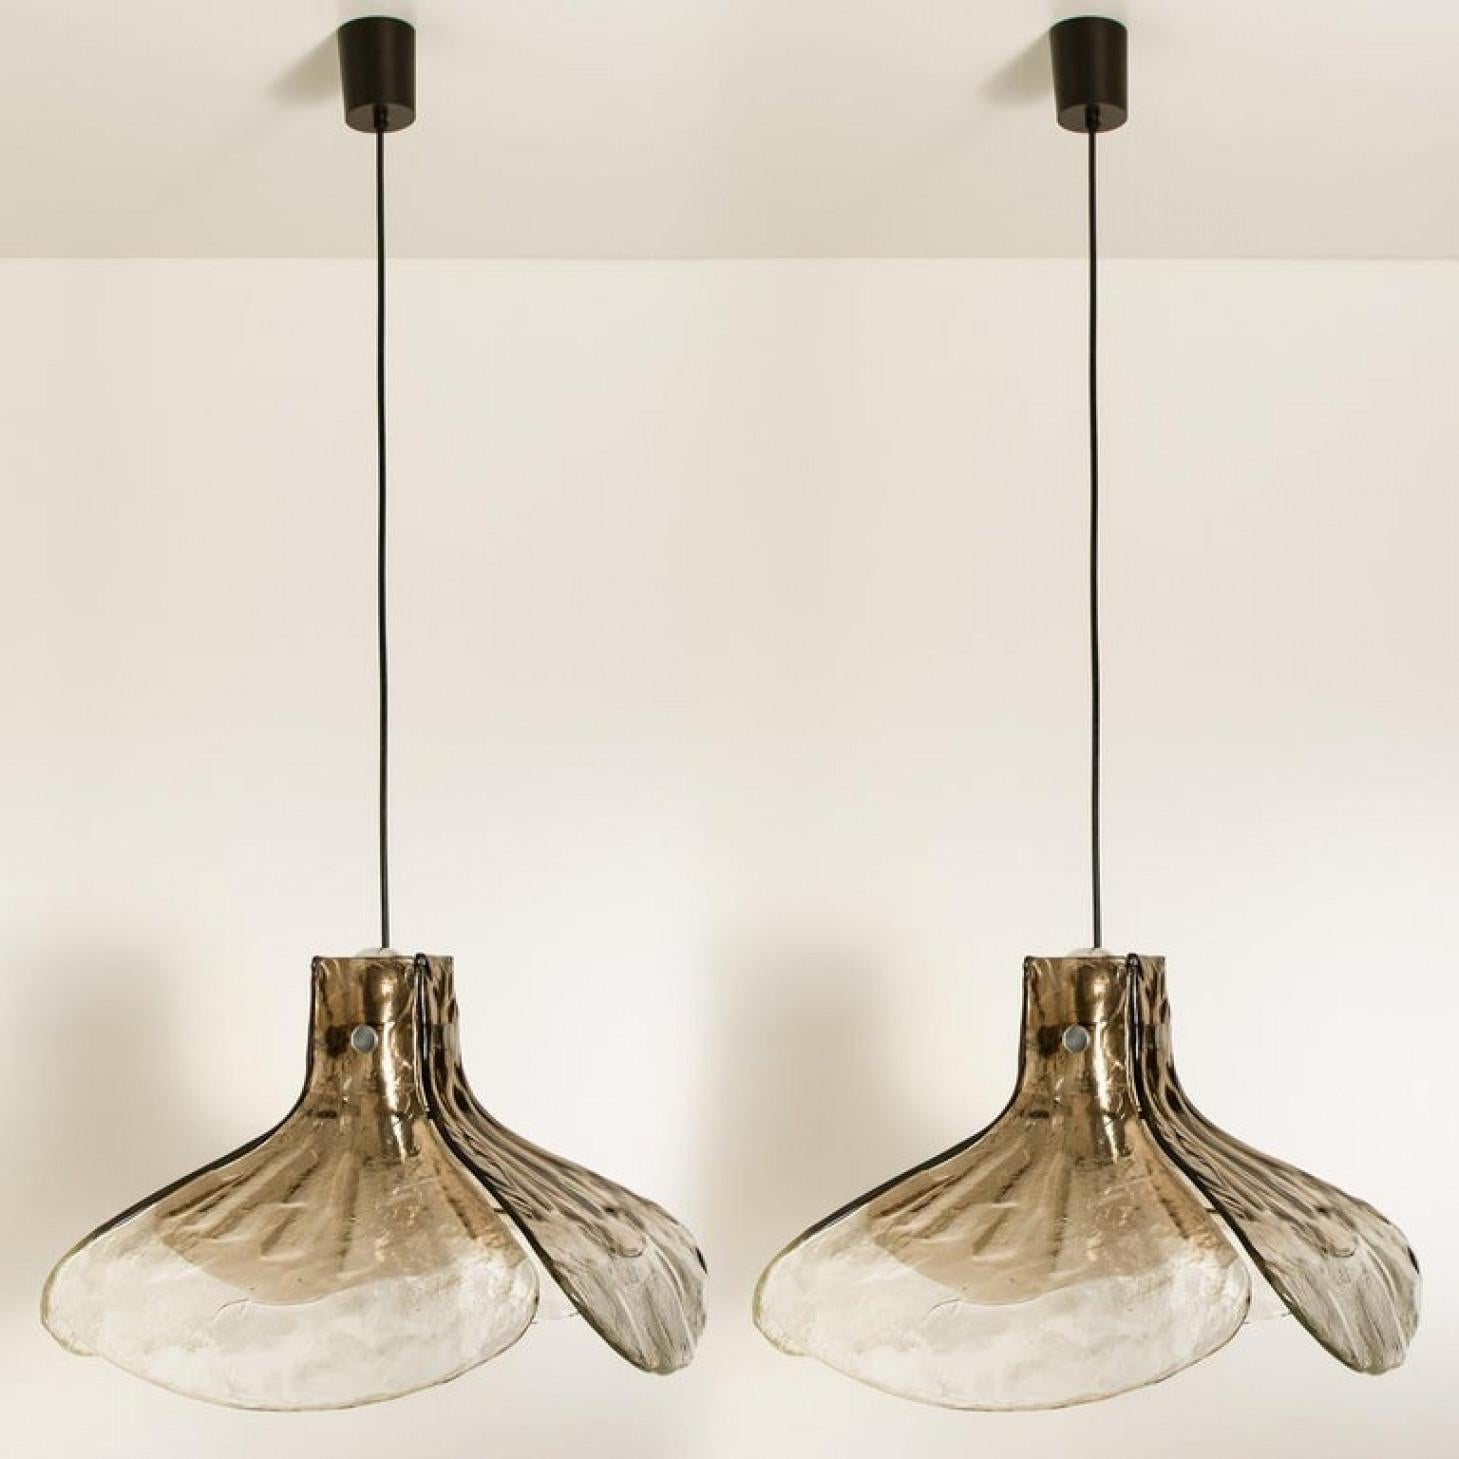 1 of the 2 pendant lamps, model LS185 by Carlo Nason for Mazzega.
Four crystal clear and smoked leaves compose this beautiful handmade piece of thick Murano glass.

Measures: H 16.93” (43 cm), D 23.62